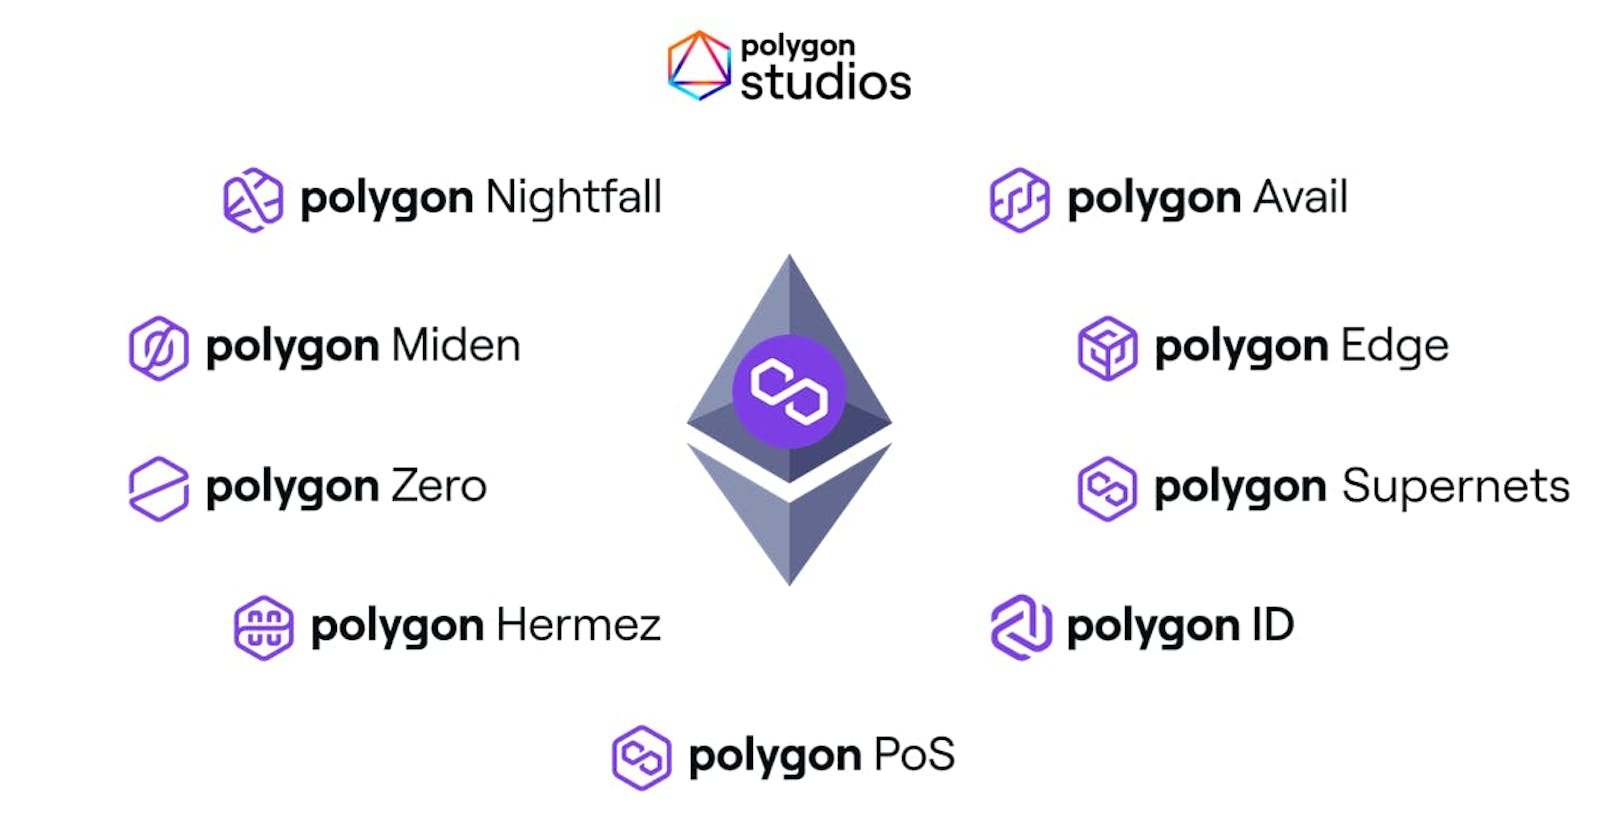 Polygon: The SHIELD of ETHEREUM